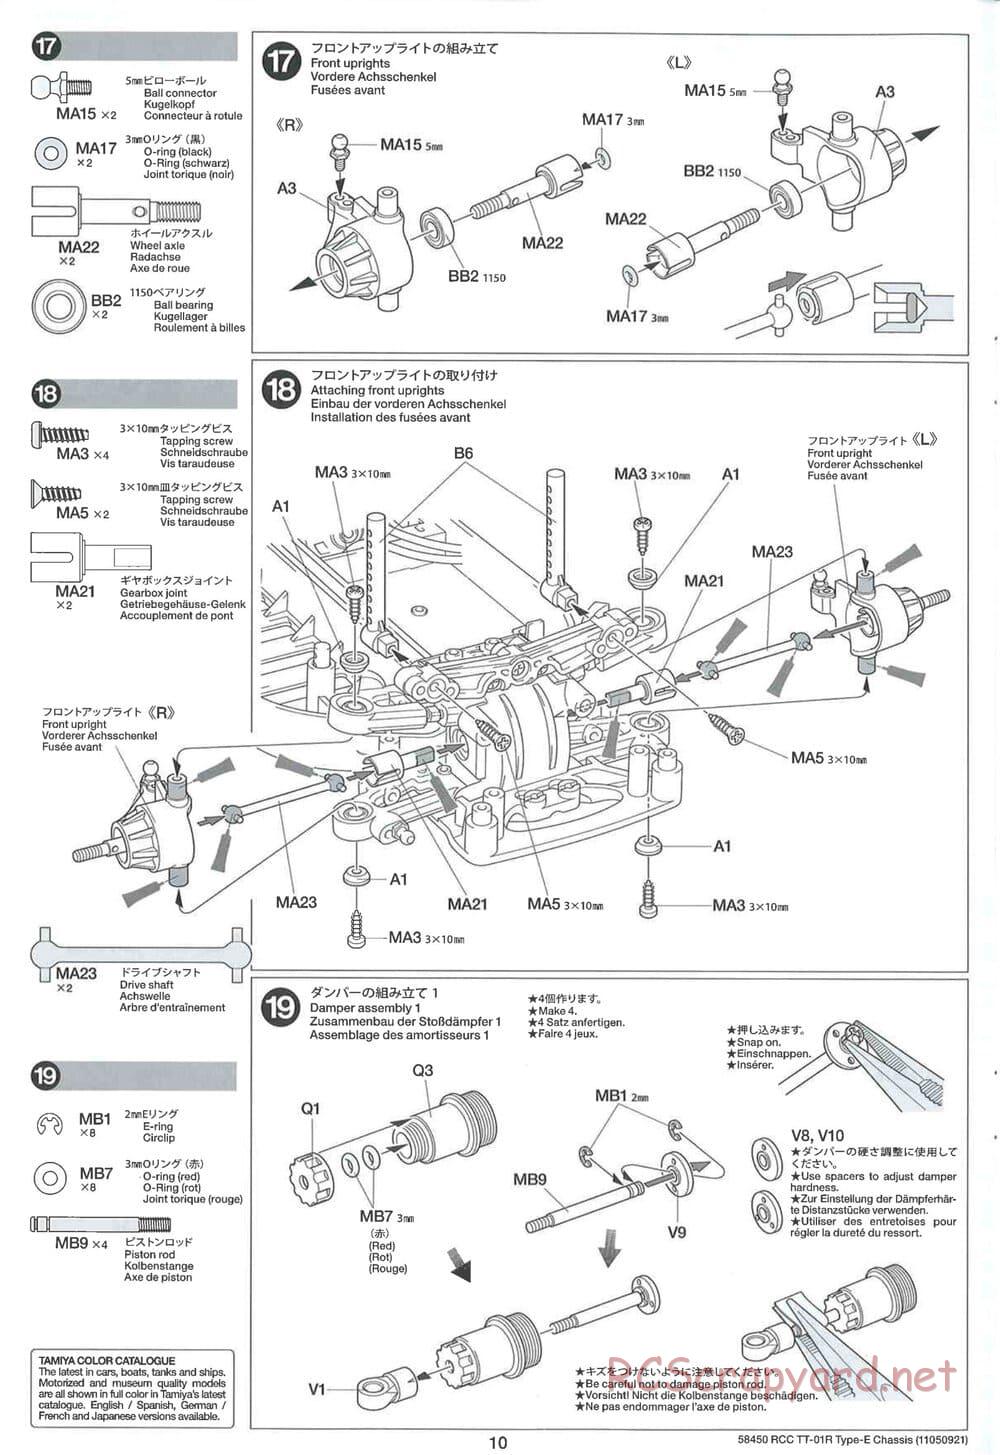 Tamiya - TT-01R Type-E Chassis - Manual - Page 10